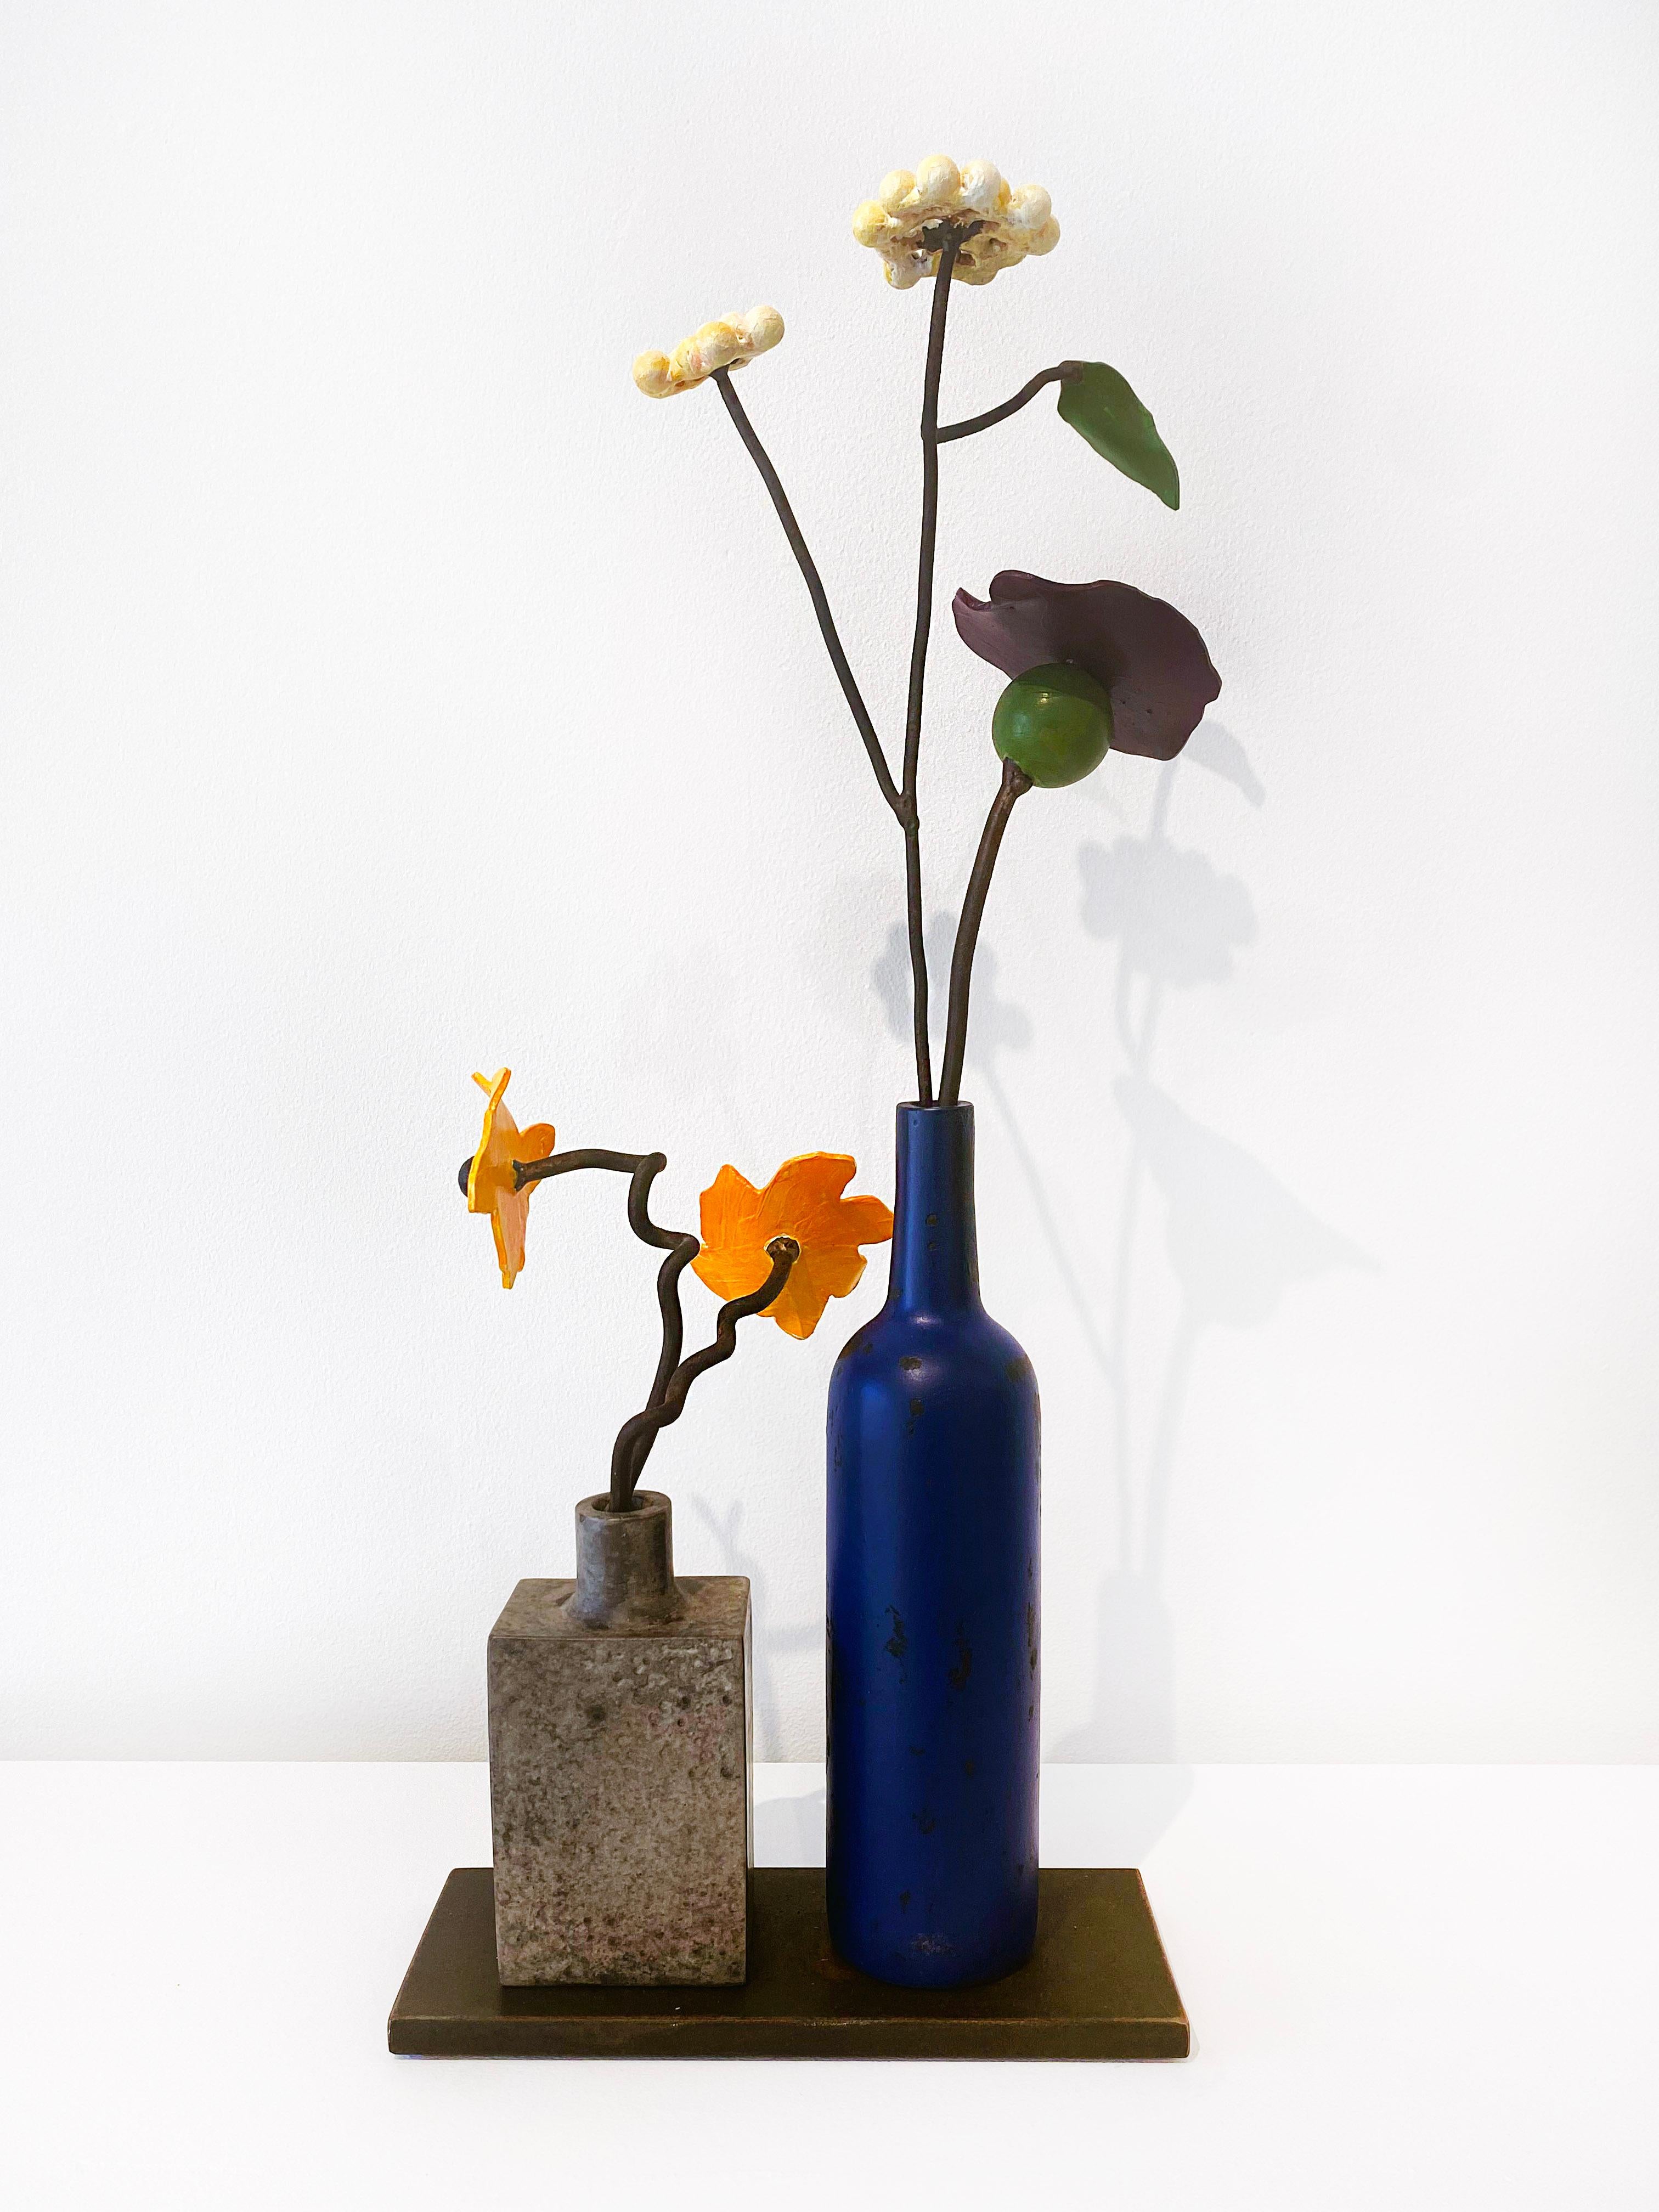 Bronze and Steel Sculpture by David Kimball Anderson 'Blue Bottle Summer' 2